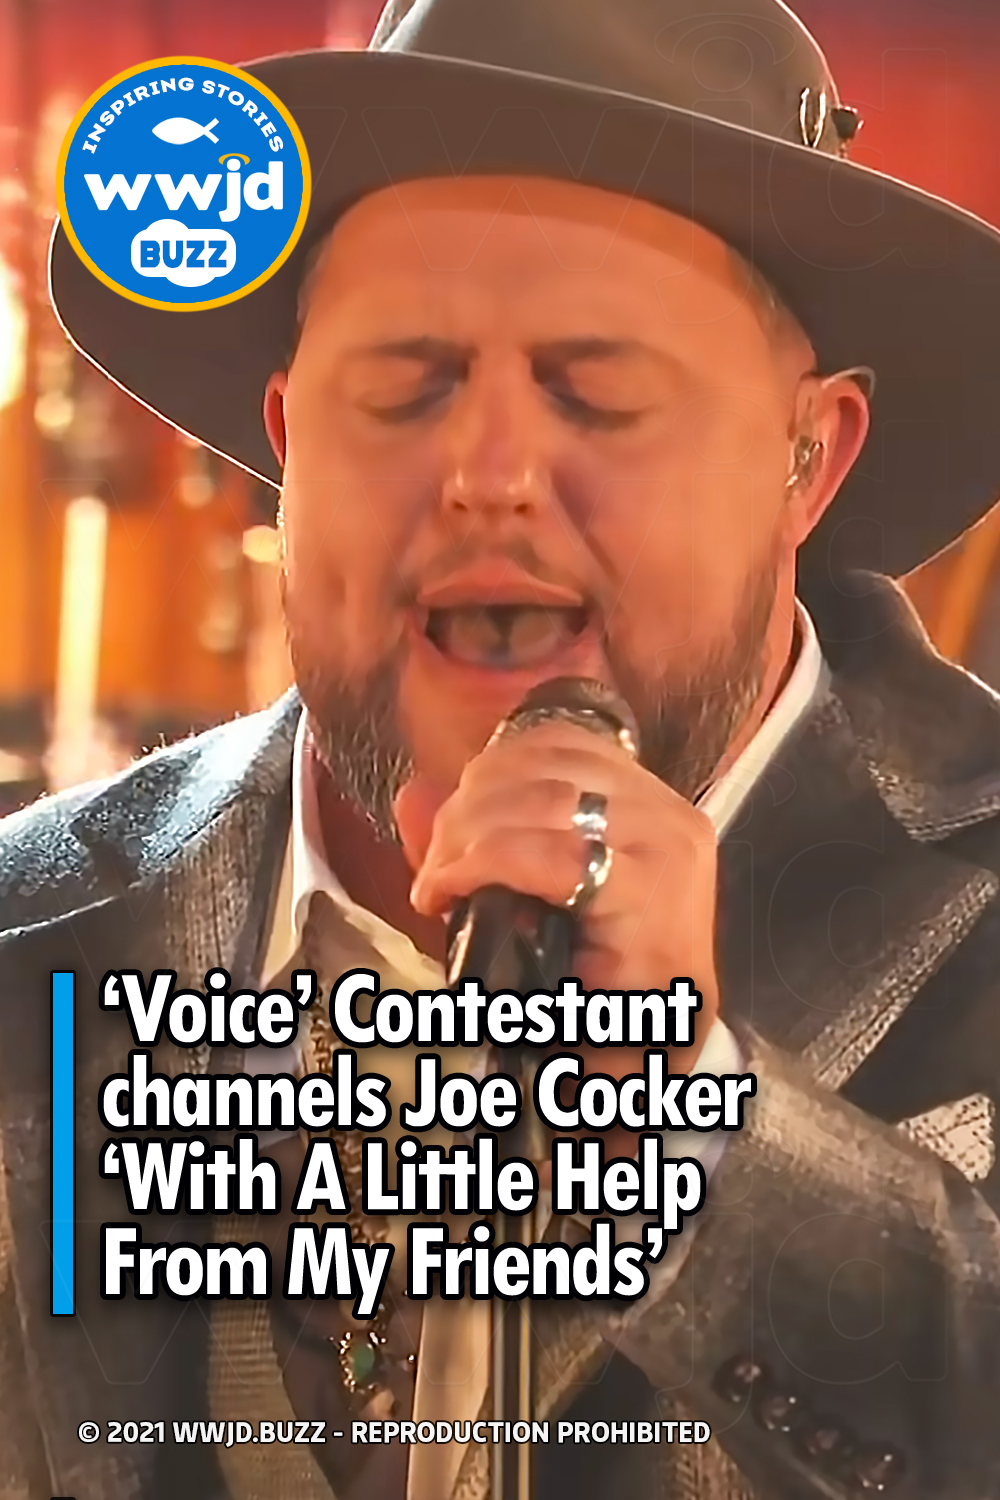 ‘Voice’ Contestant channels Joe Cocker ‘With A Little Help From My Friends’